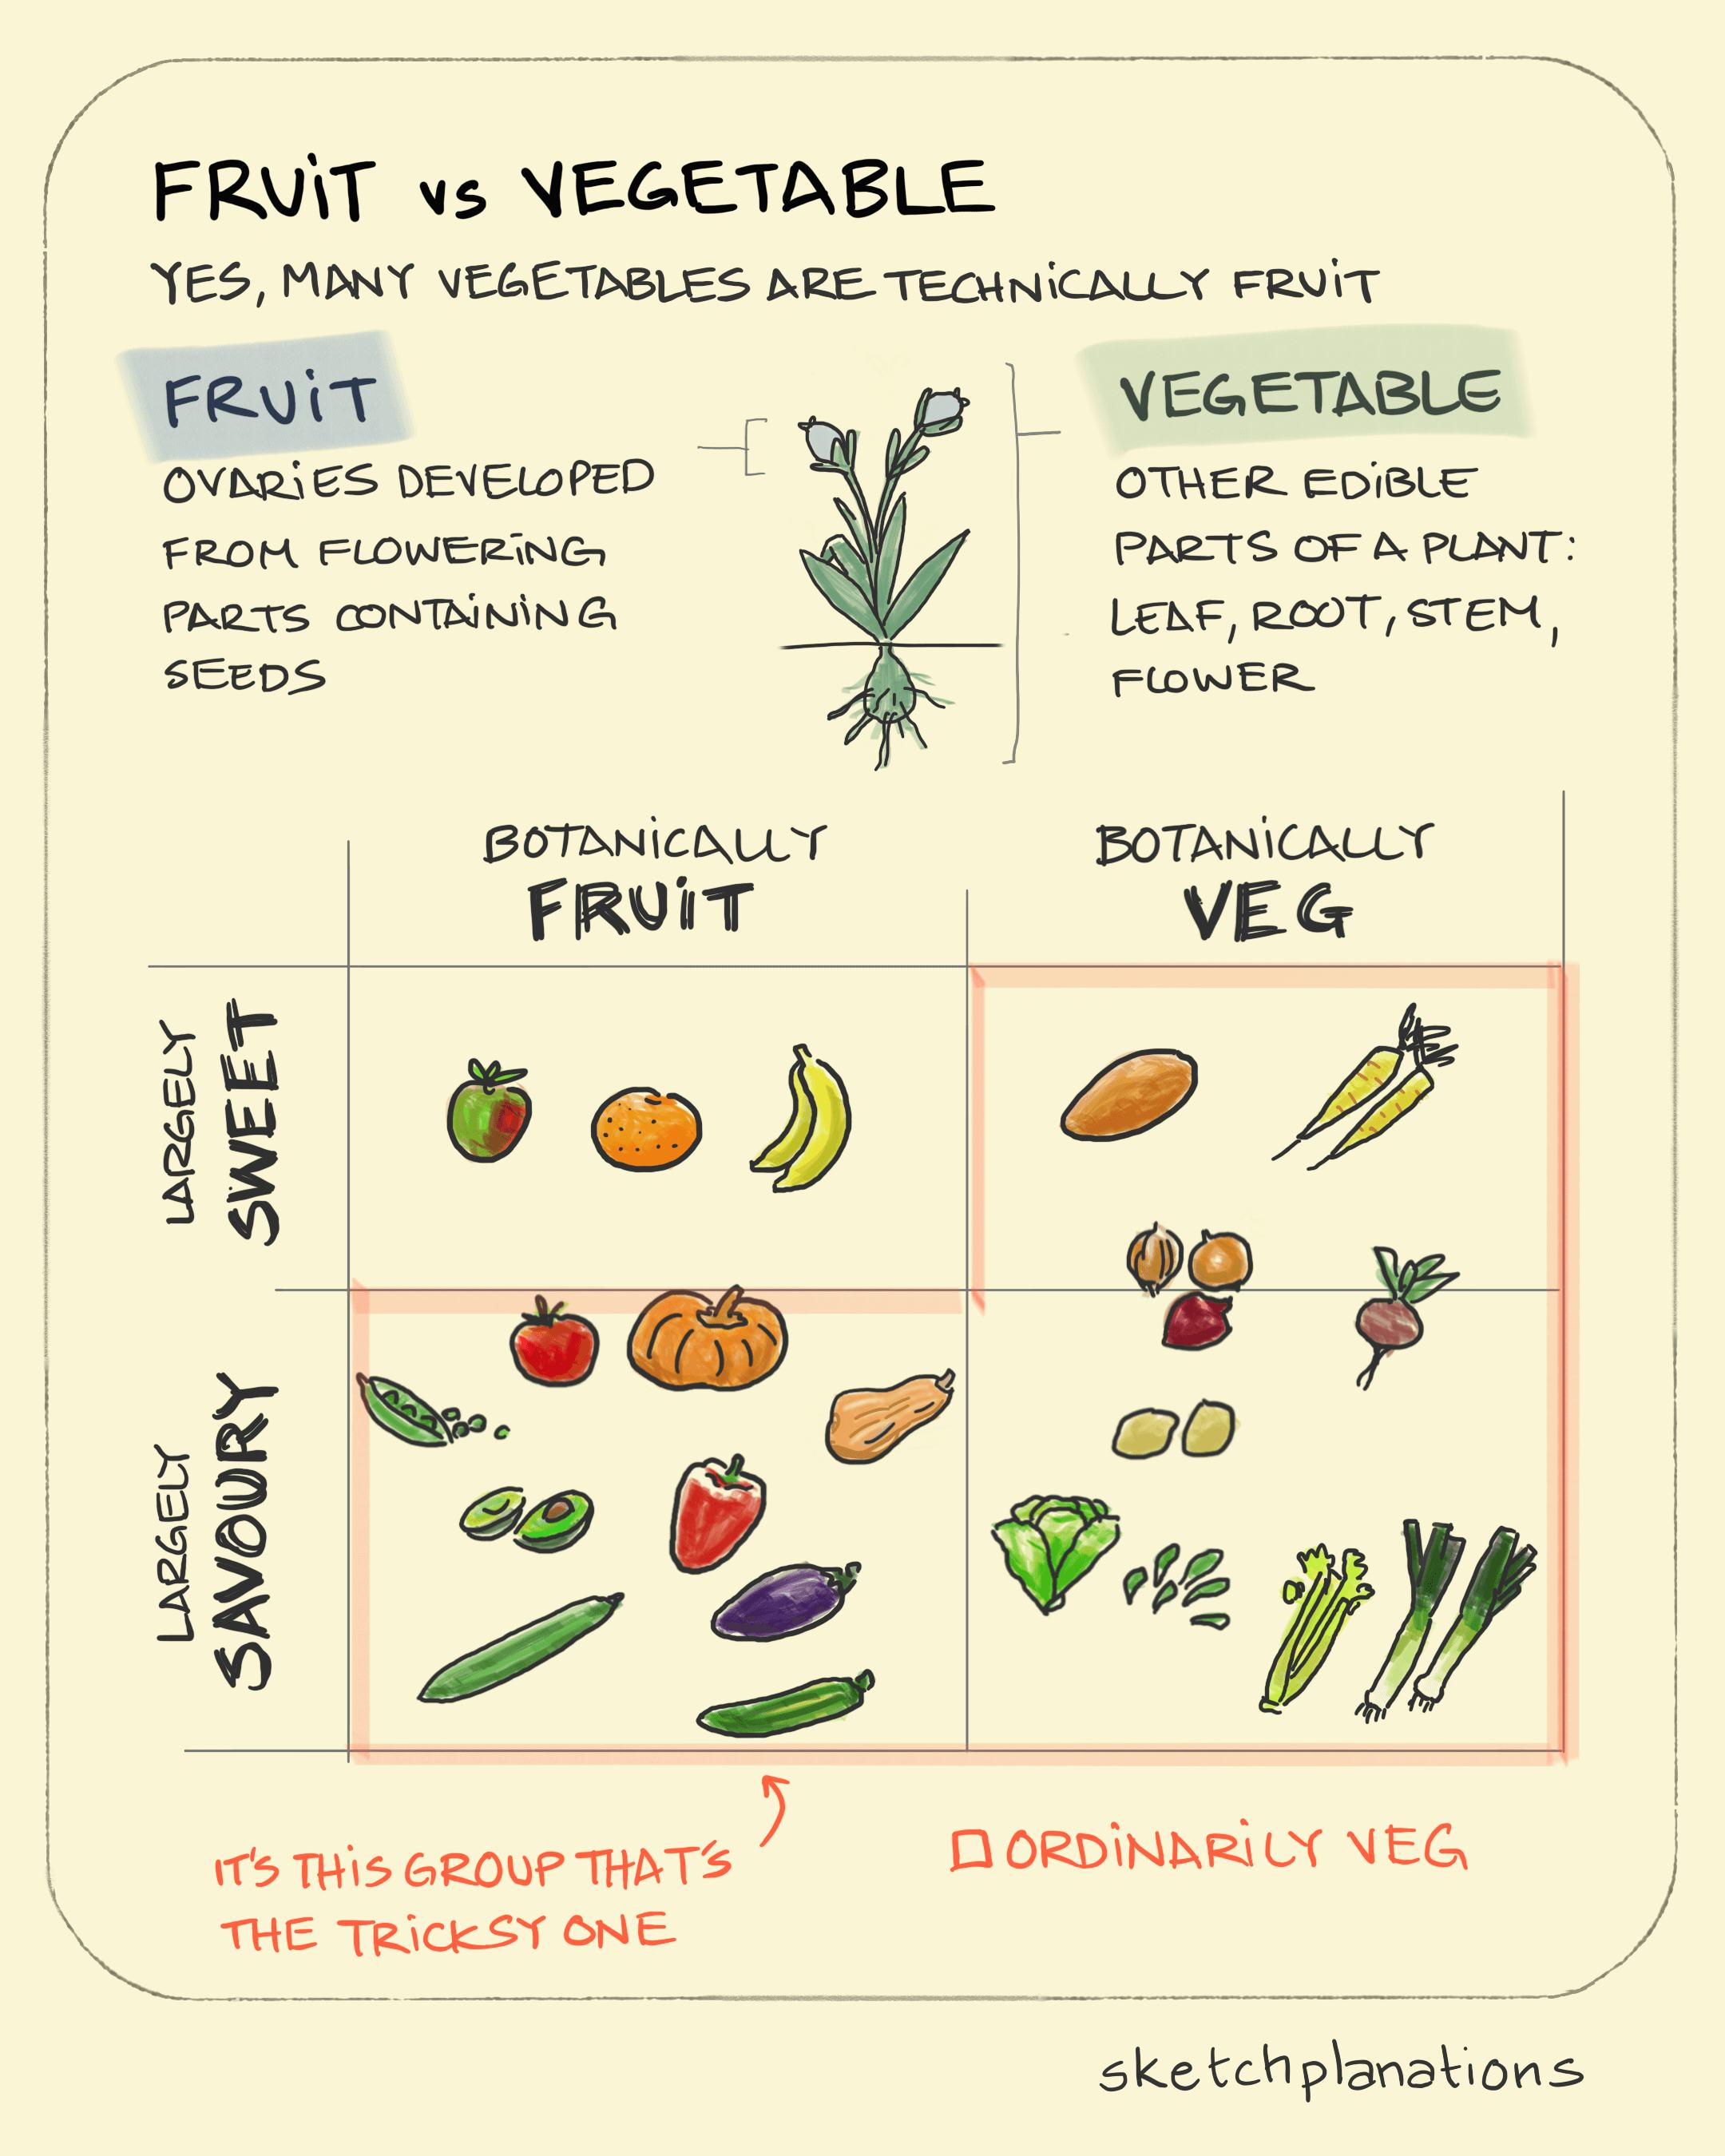 Fruit vs vegetable drawing: showing the elements of a plant that are fruit or vegetable and a 2x2 matrix for which are commonly miscategorised